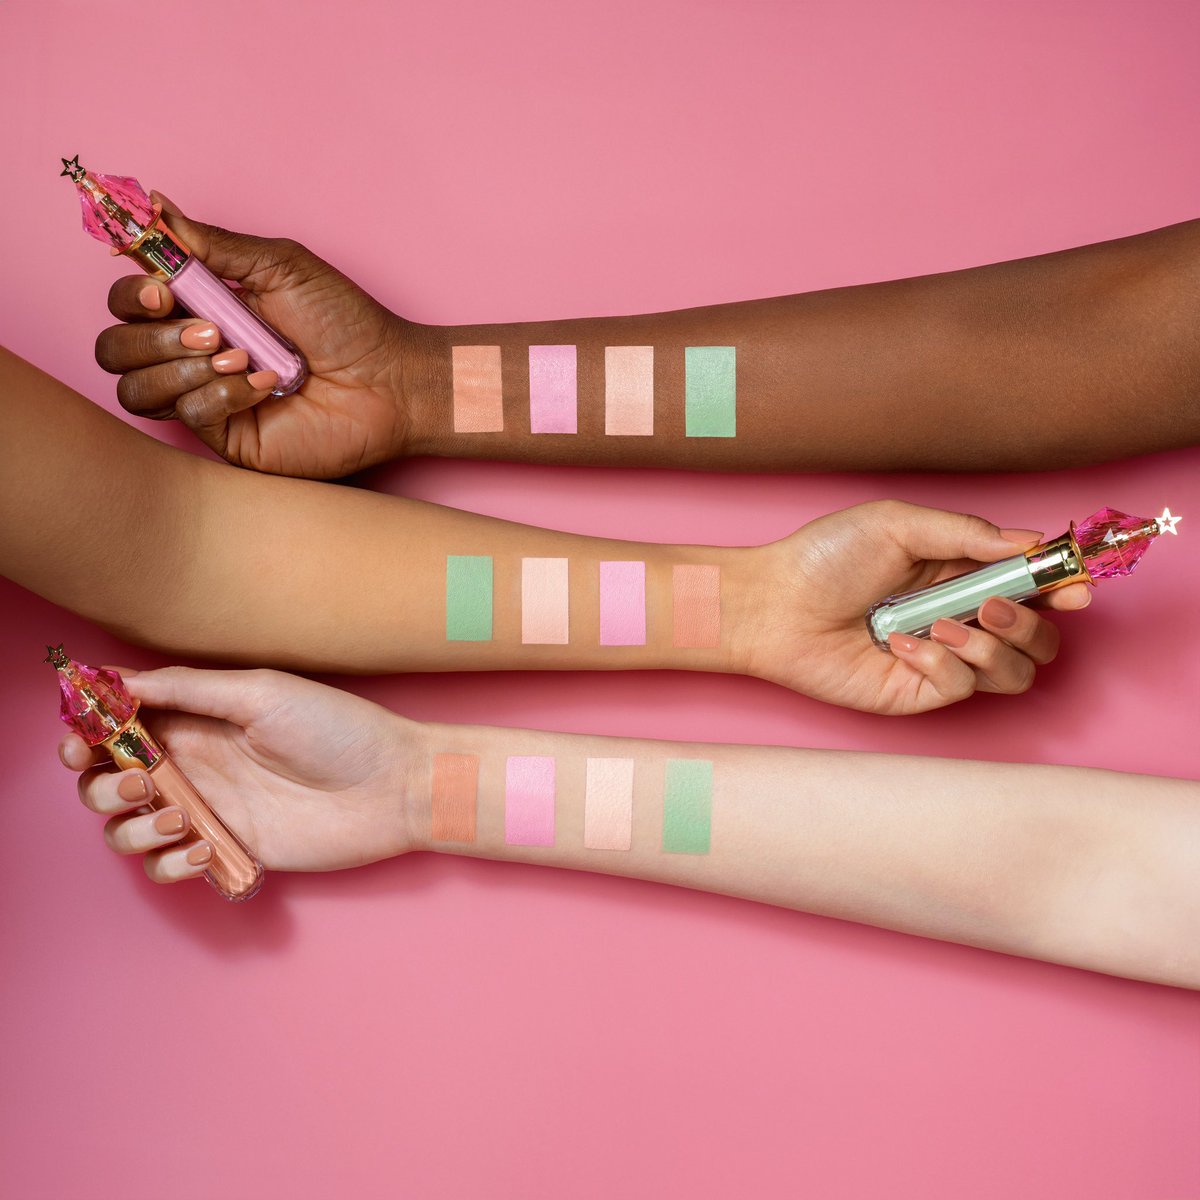 Dive into my #MagicCandy Color Correctors in 4 NEW shades! 🌸 AVAILABLE NOW!!! 🍑 They’re creamy, high coverage, and ready to slay! Say goodbye to dullness and hello to flawless perfection! ✨ SHOP: jeffreestarcosmetics.com/products/magic…